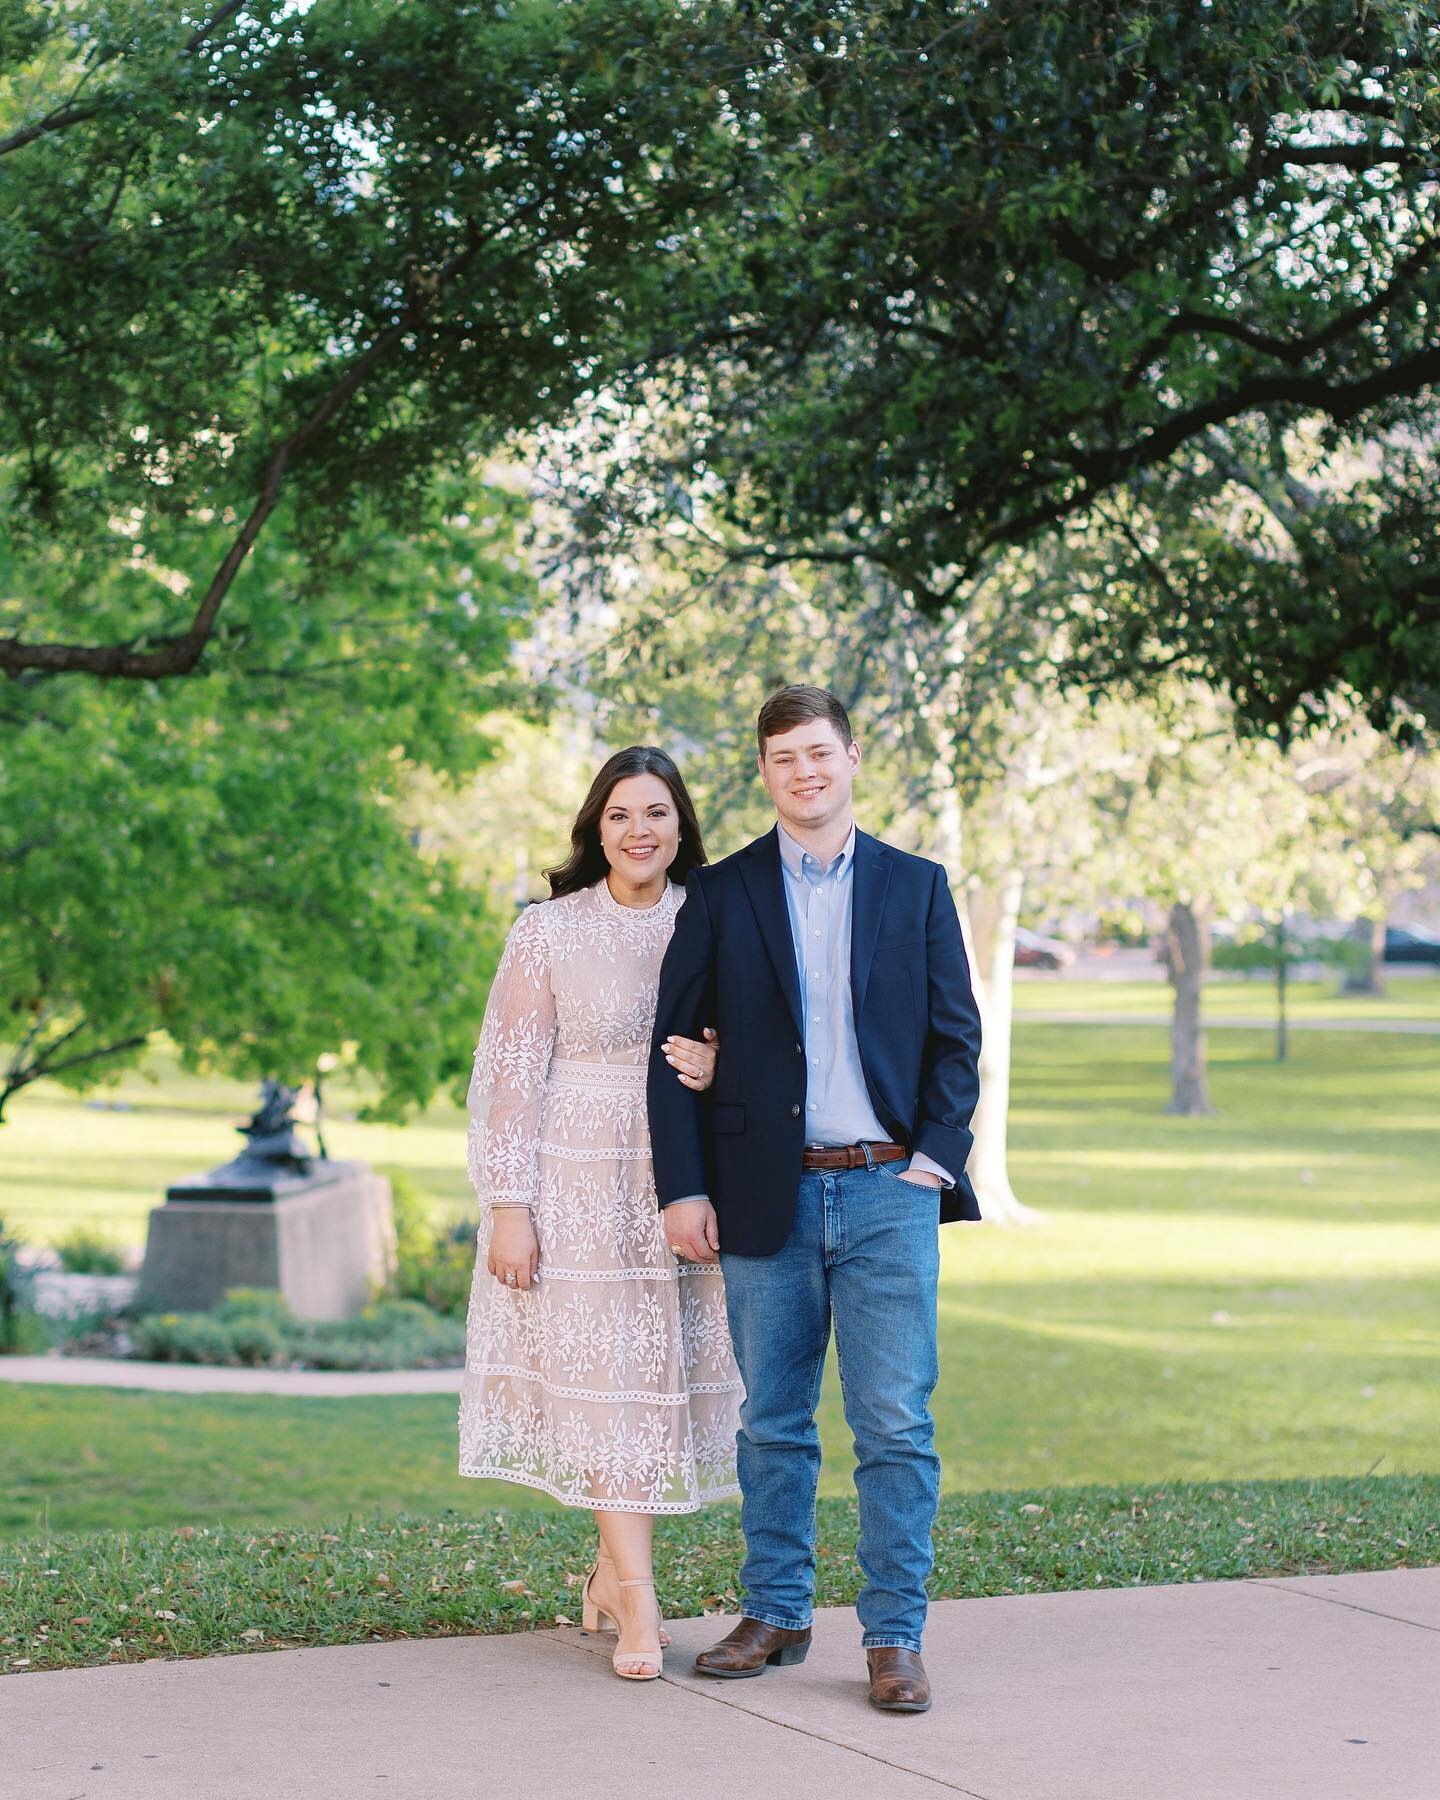 We&rsquo;re one week away from sending these two down the aisle in Hill Country! 

It&rsquo;s not often that you get to plan the wedding and be the maid of honor&hellip; As you may imagine, emotions are high. 

I&rsquo;m so grateful to have Maddy on 